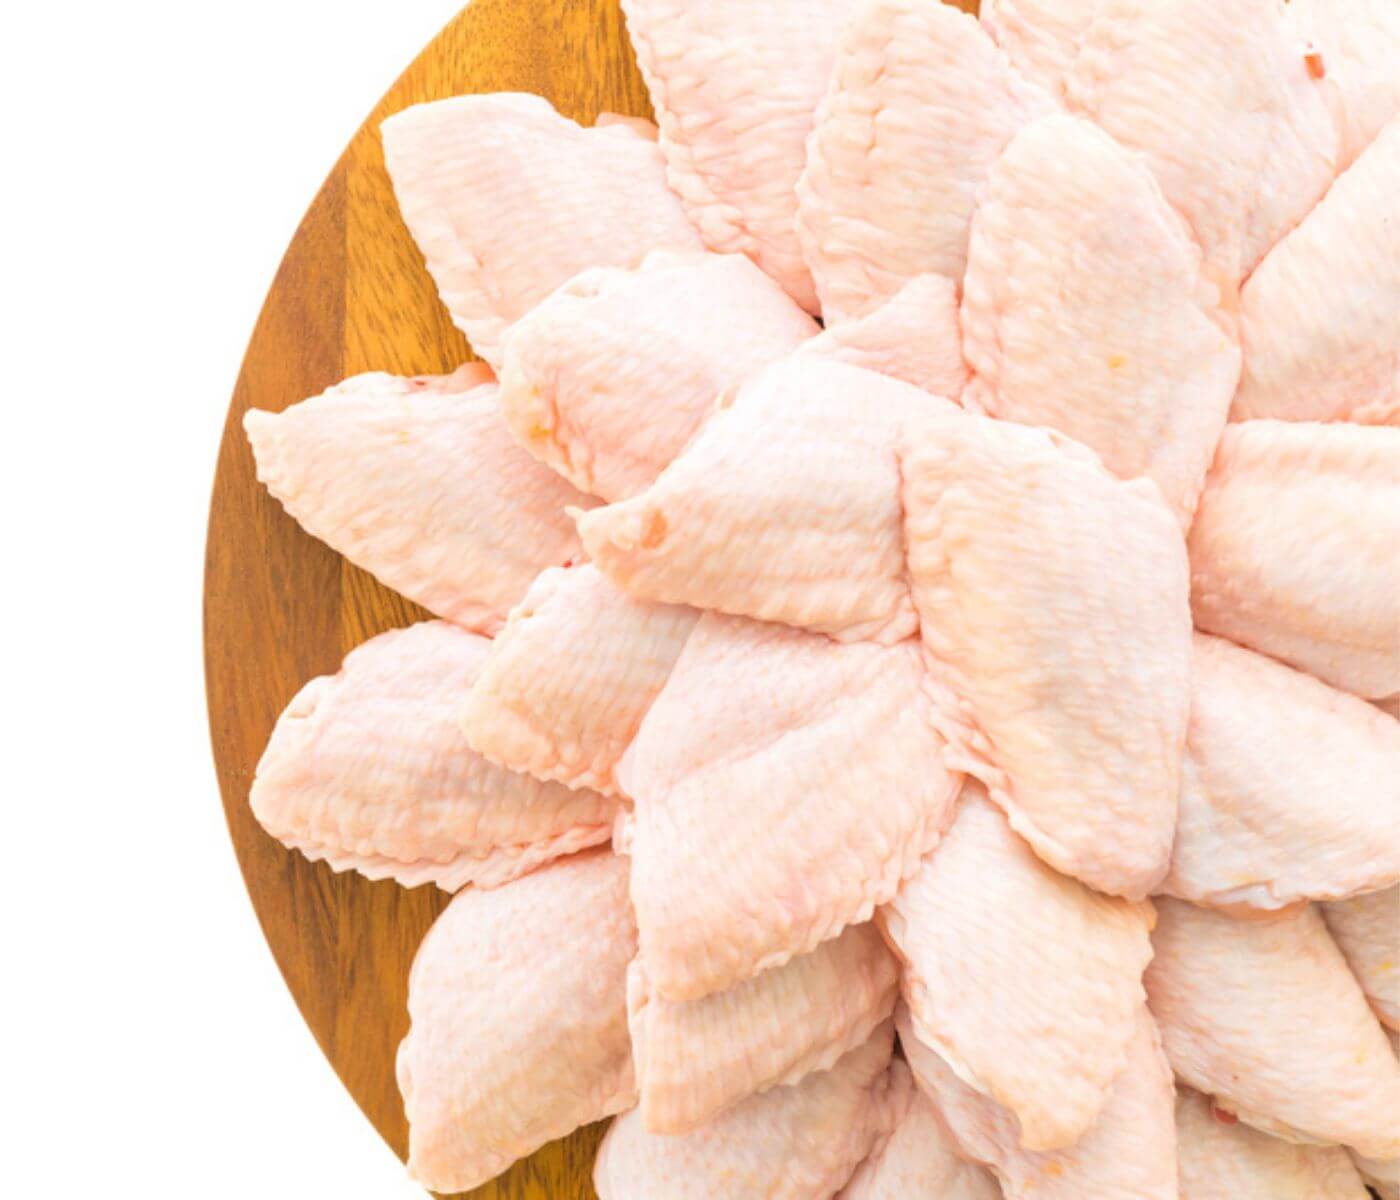 Chicken wings and breasts as relief for consumers during inflation...